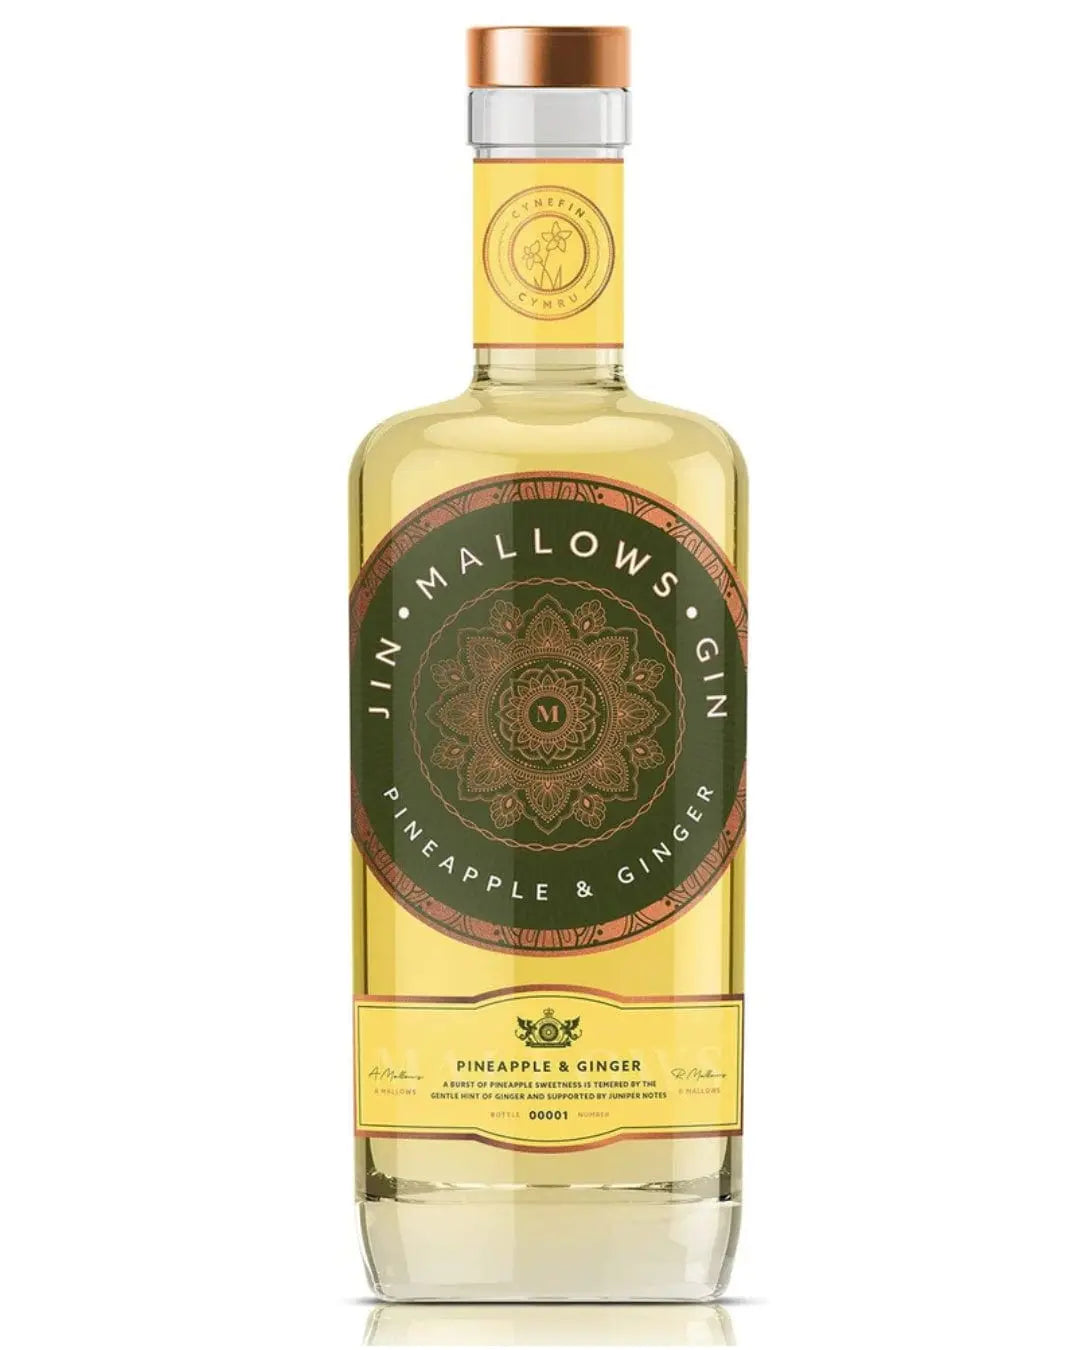 Mallows Pineapple & Ginger Flavoured Gin, 70 cl Gin